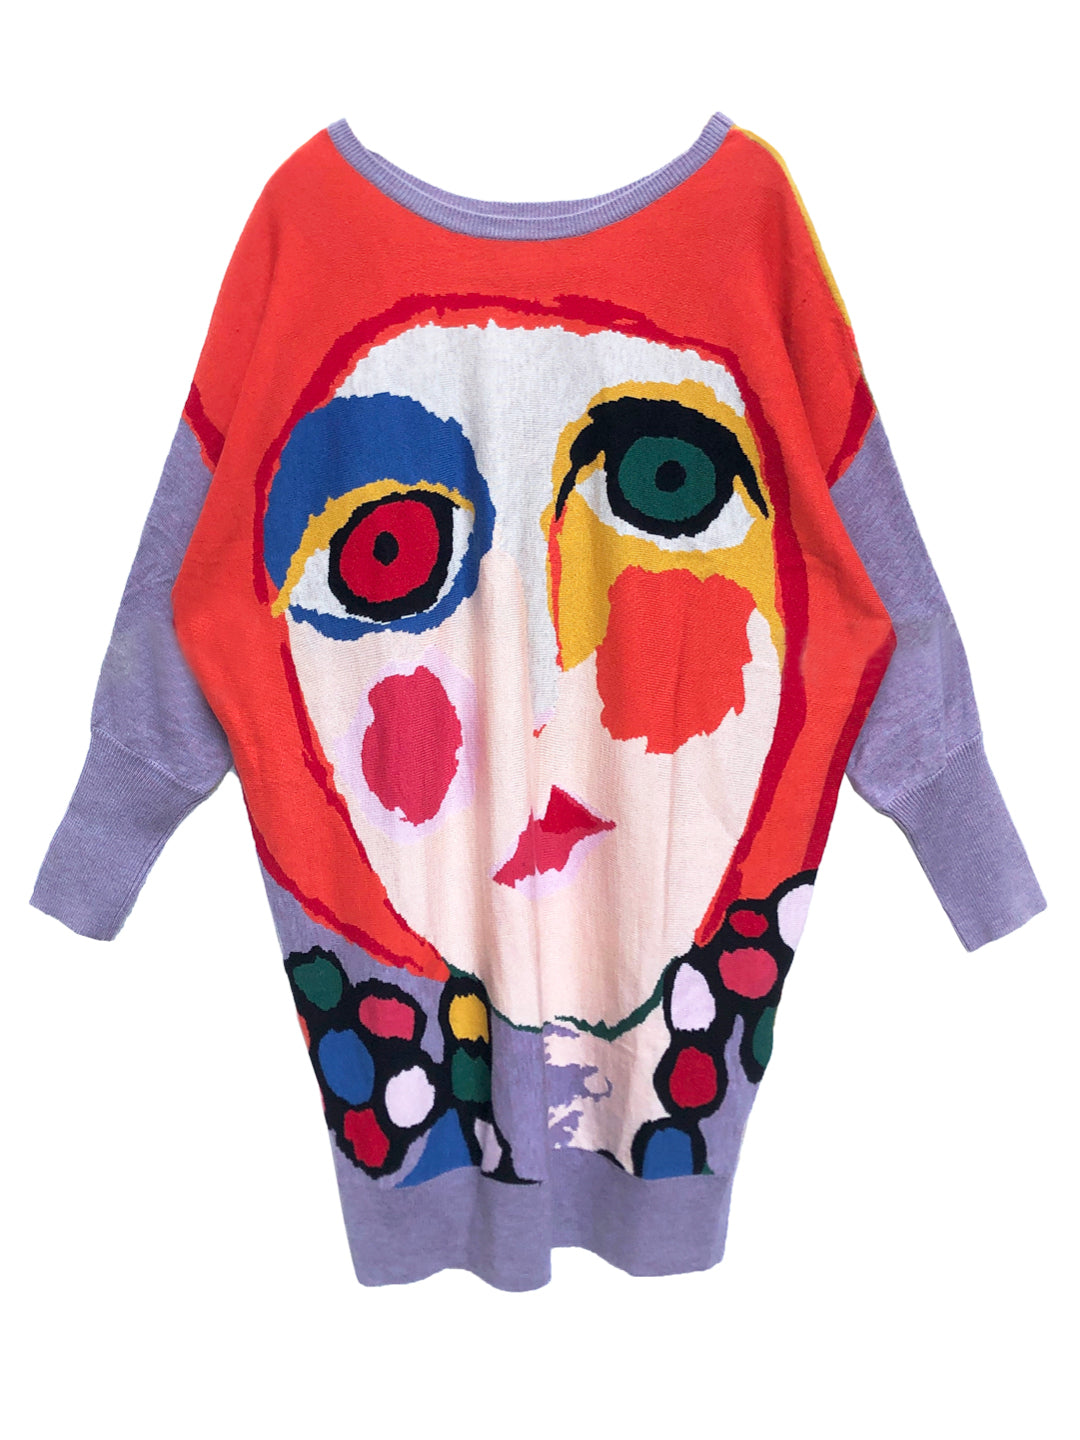 Unlogical Poem Double-sided Girl Face Illustration Knitted Sweater Dress